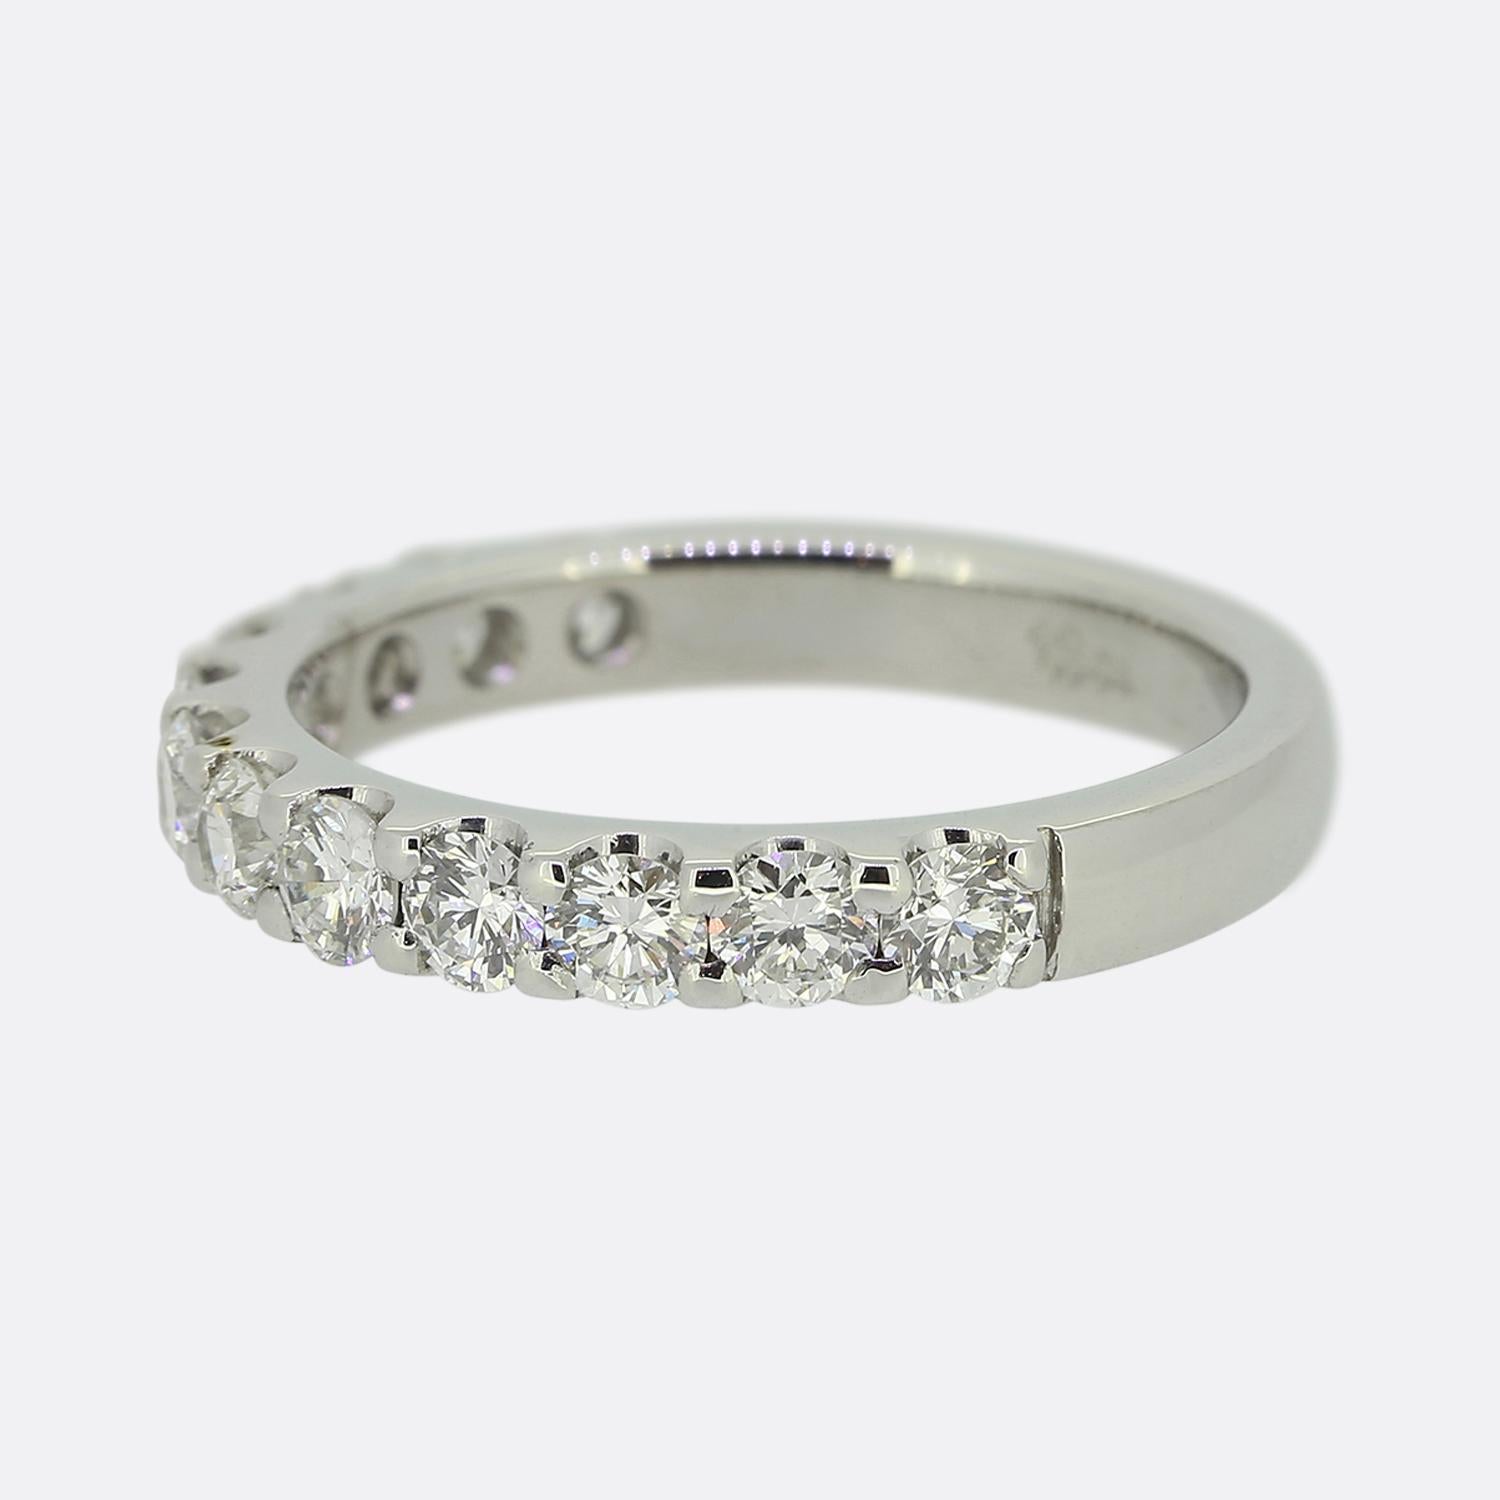 Here we have a wonderful, classically styled half eternity diamond ring. An 18ct white gold band plays host to 12 individually claw set round brilliant cut diamonds in a single line formation whilst the remainder of the shank has a plain polished